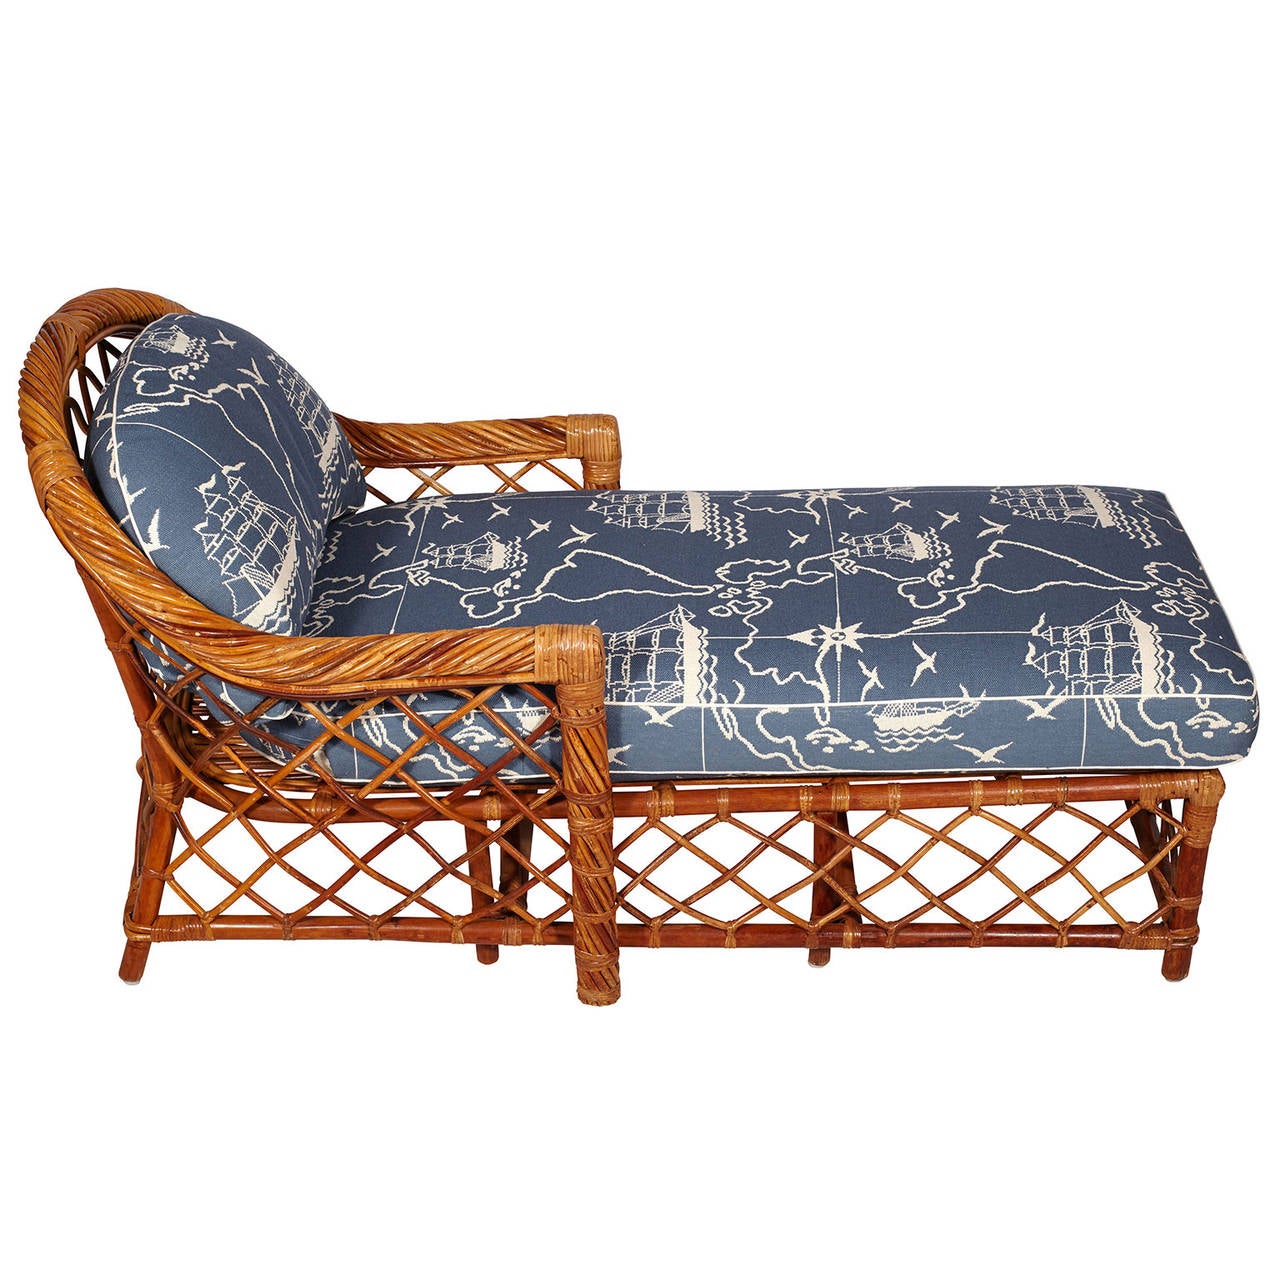 A mid-century woven rattan and bamboo chaise lounge by the Bielecky Brothers. Back and seat cushion are newly upholstered in a nautical map print.